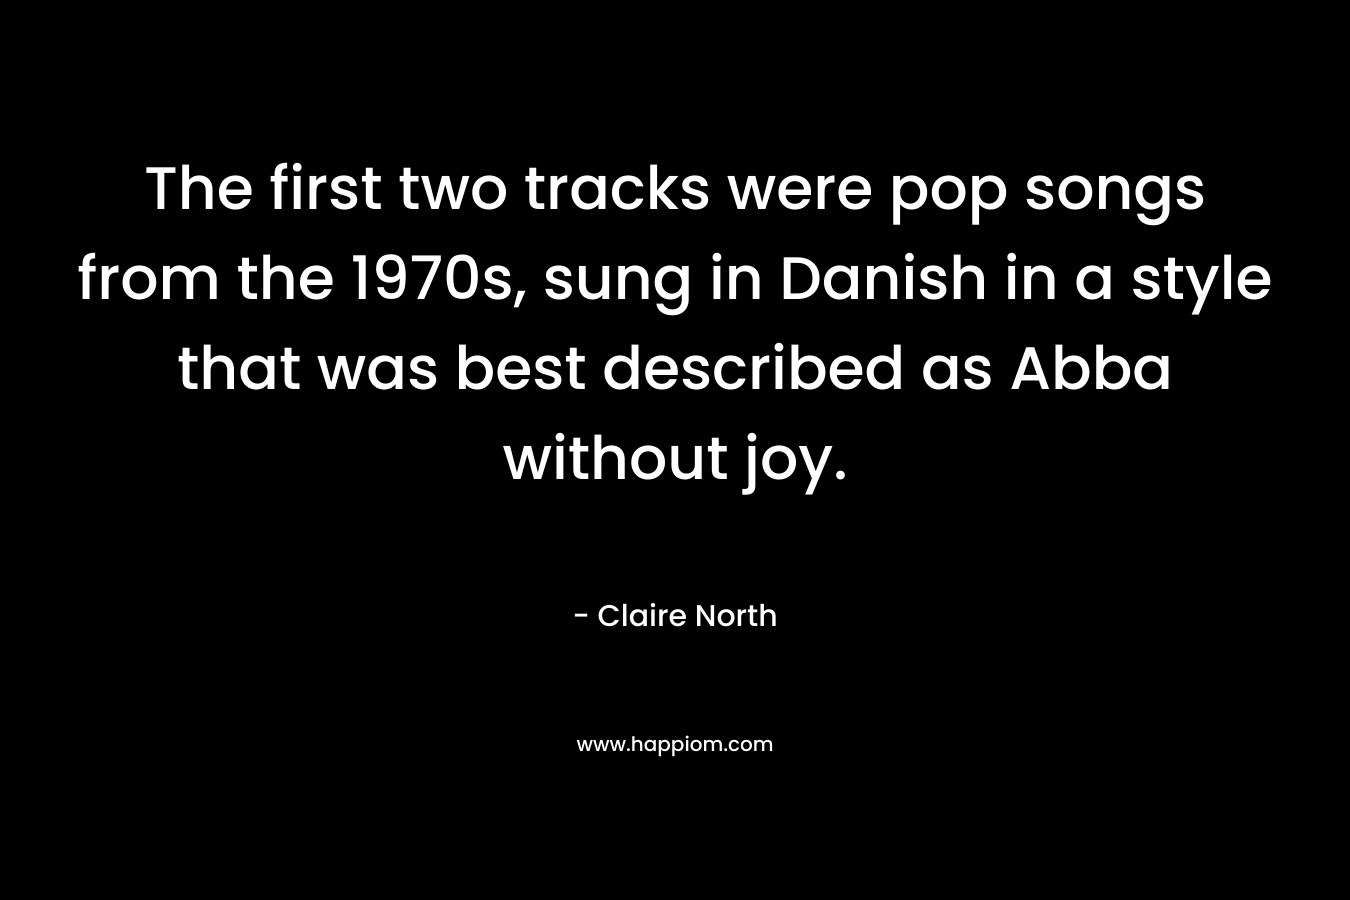 The first two tracks were pop songs from the 1970s, sung in Danish in a style that was best described as Abba without joy.